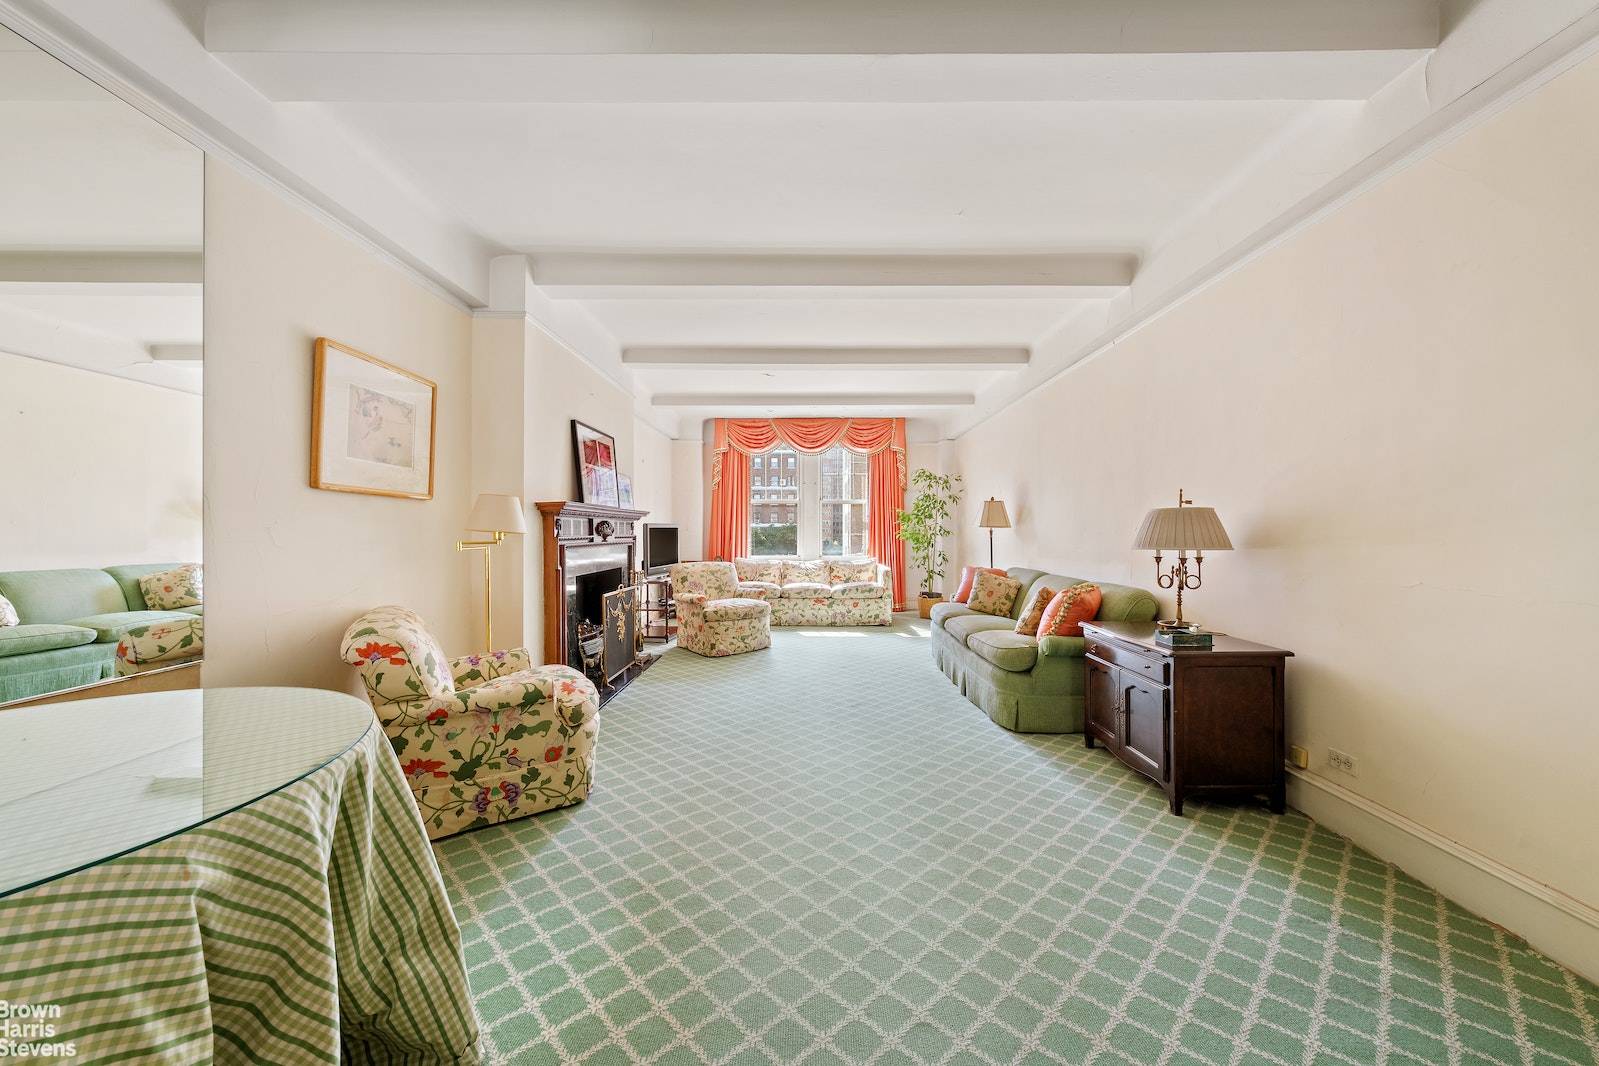 Nestled within one of Park Avenue's most distinguished cooperative buildings, this delightful two bedroom residence NEEDS YOUR PERSONAL TOUCH !